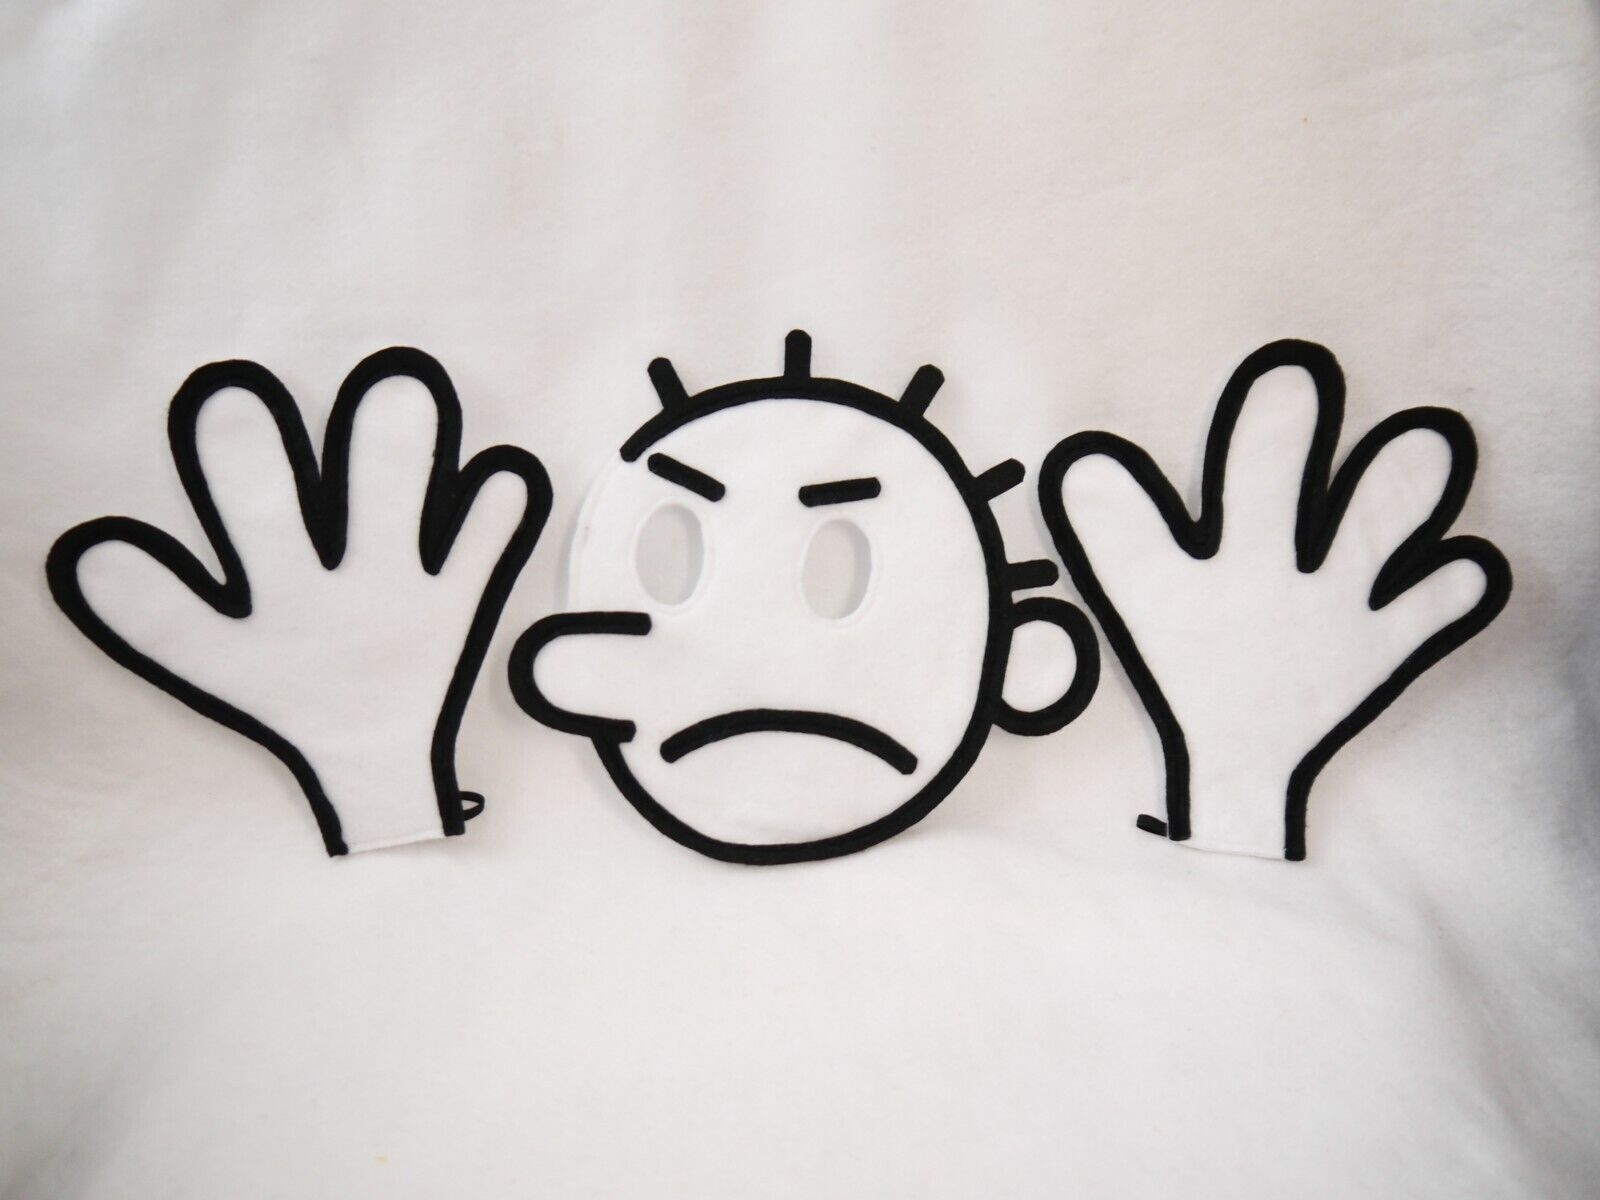 Diary Of A Wimpy Kid Printable Mask